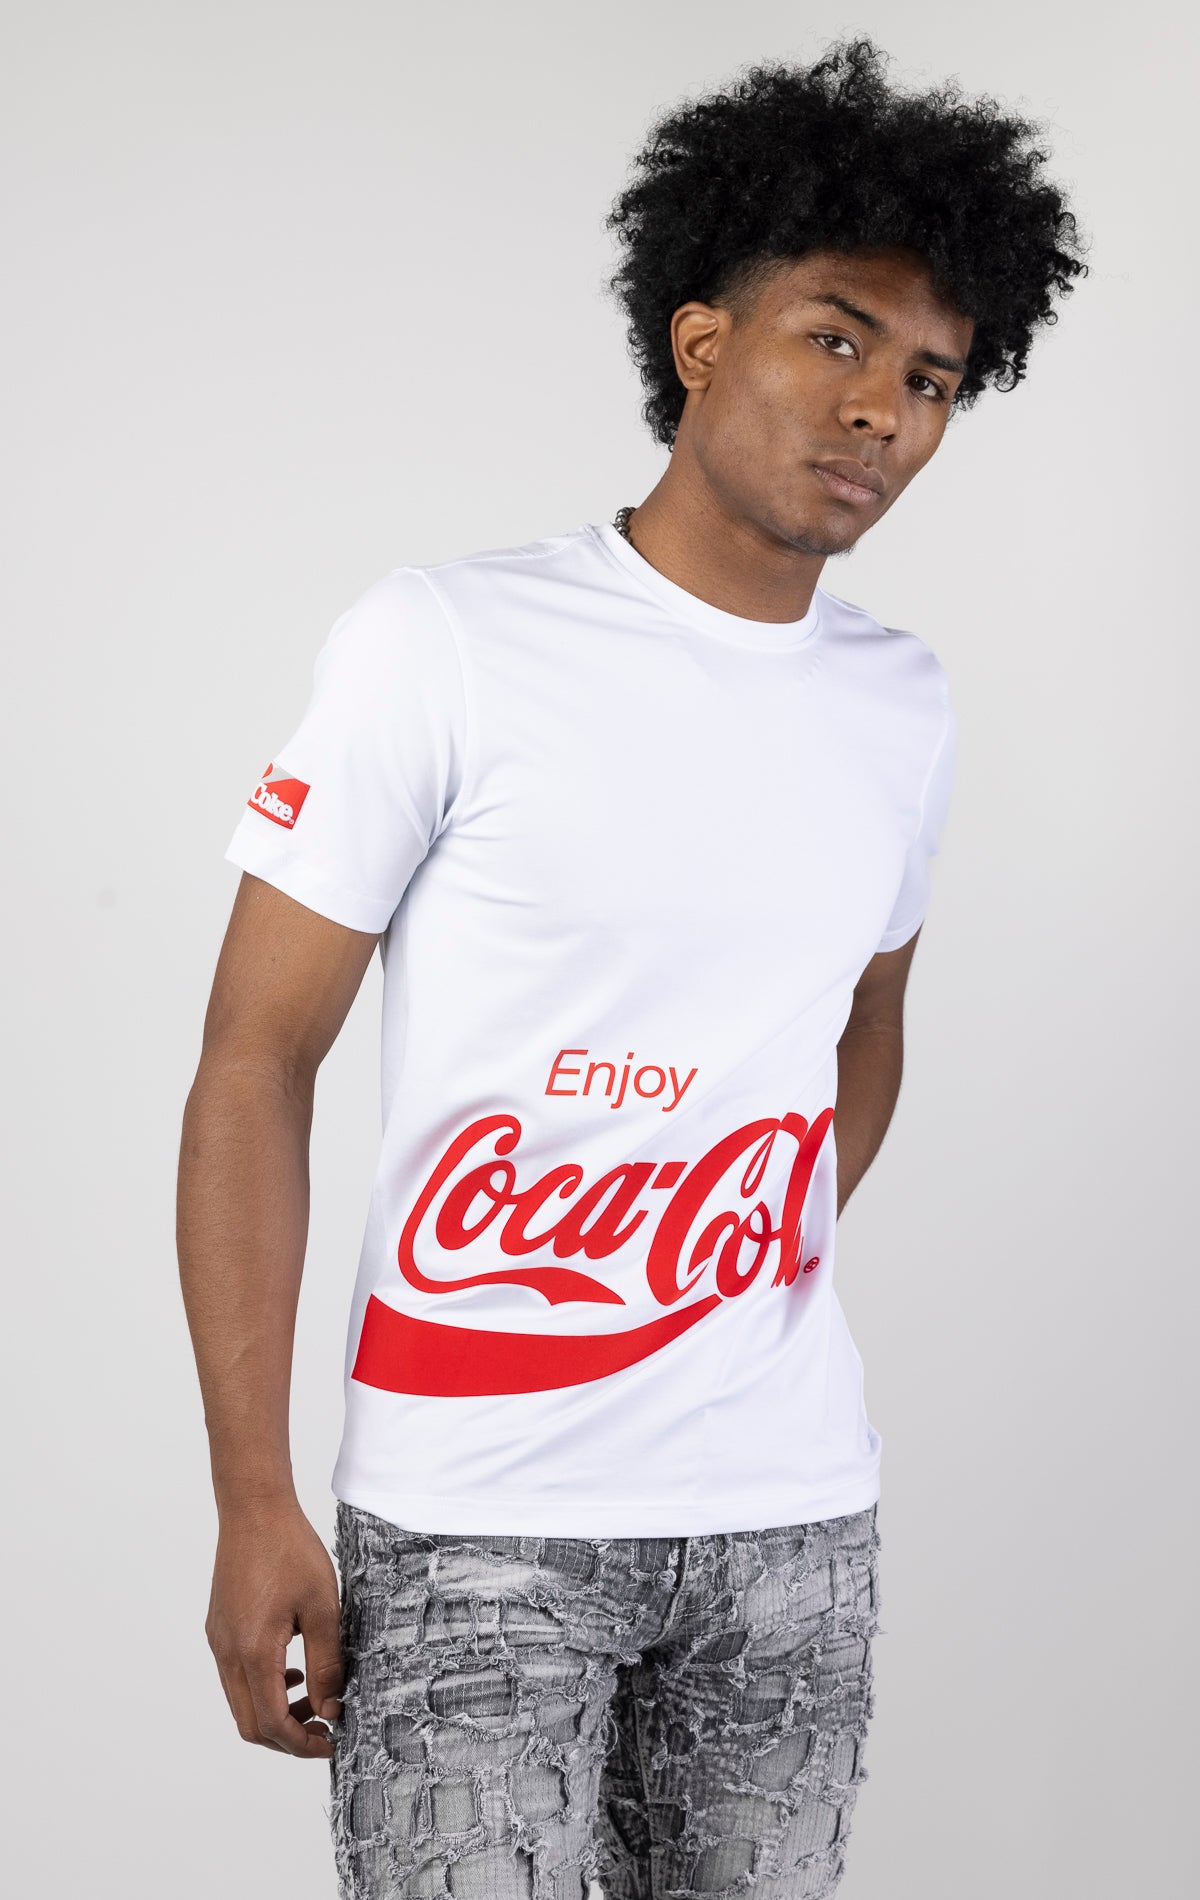 Men's short-sleeve crew neck t-shirt in a variety of colors. The shirt features a Coca-Cola logo graphic on the front. The graphic is heat-sealed and the tee is made from a blend of 94% cotton and 6% spandex.